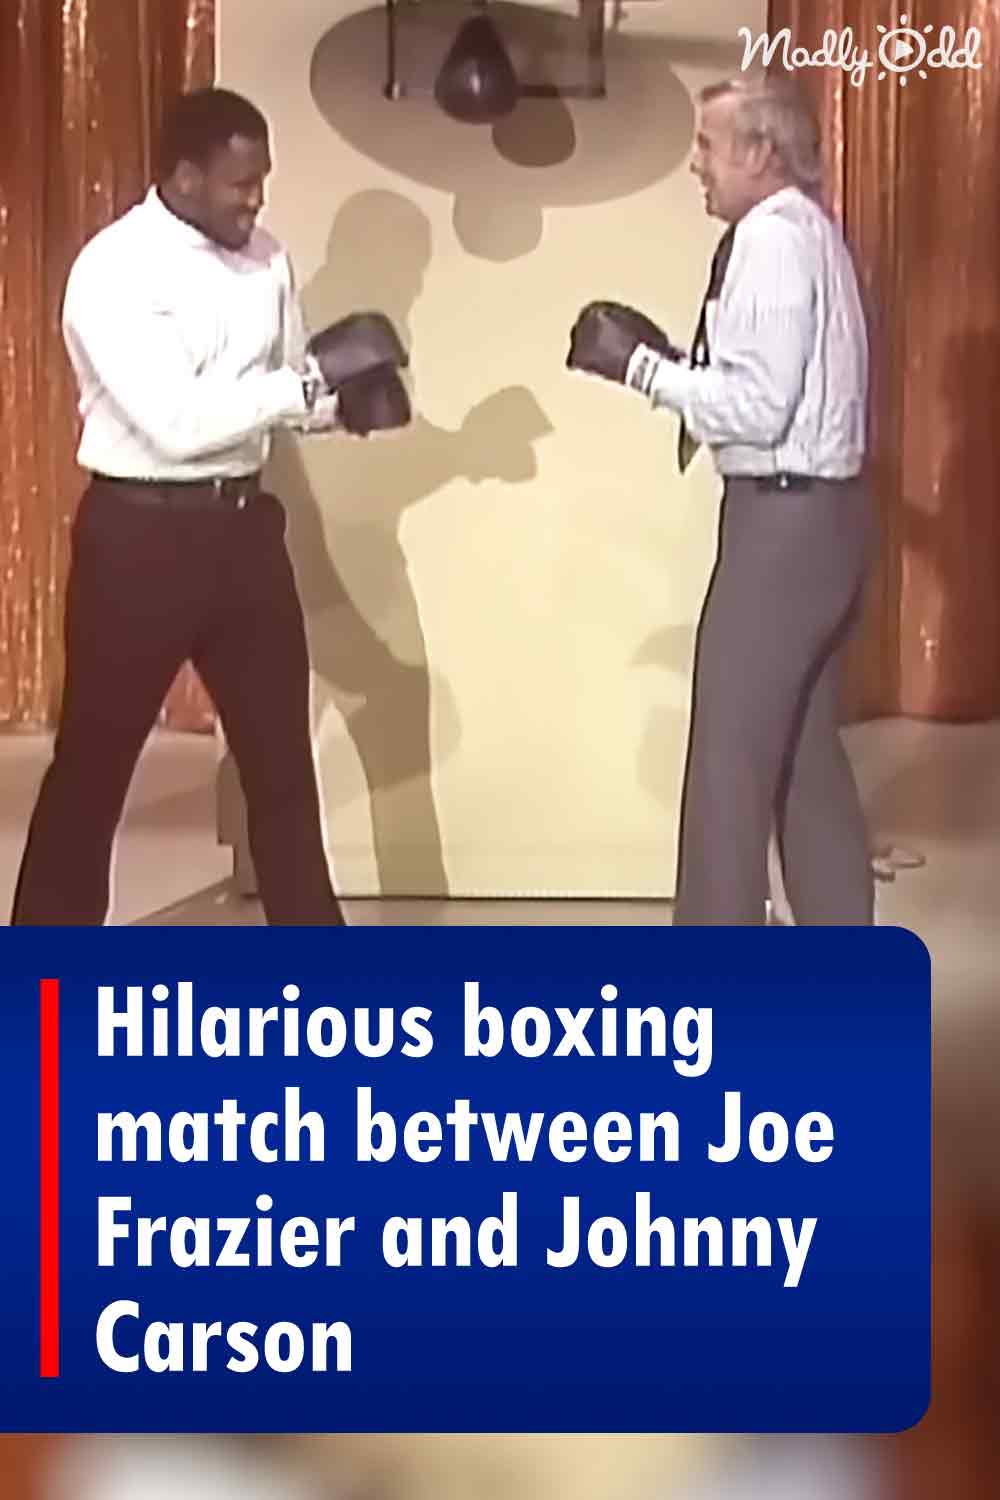 Hilarious boxing match between Joe Frazier and Johnny Carson